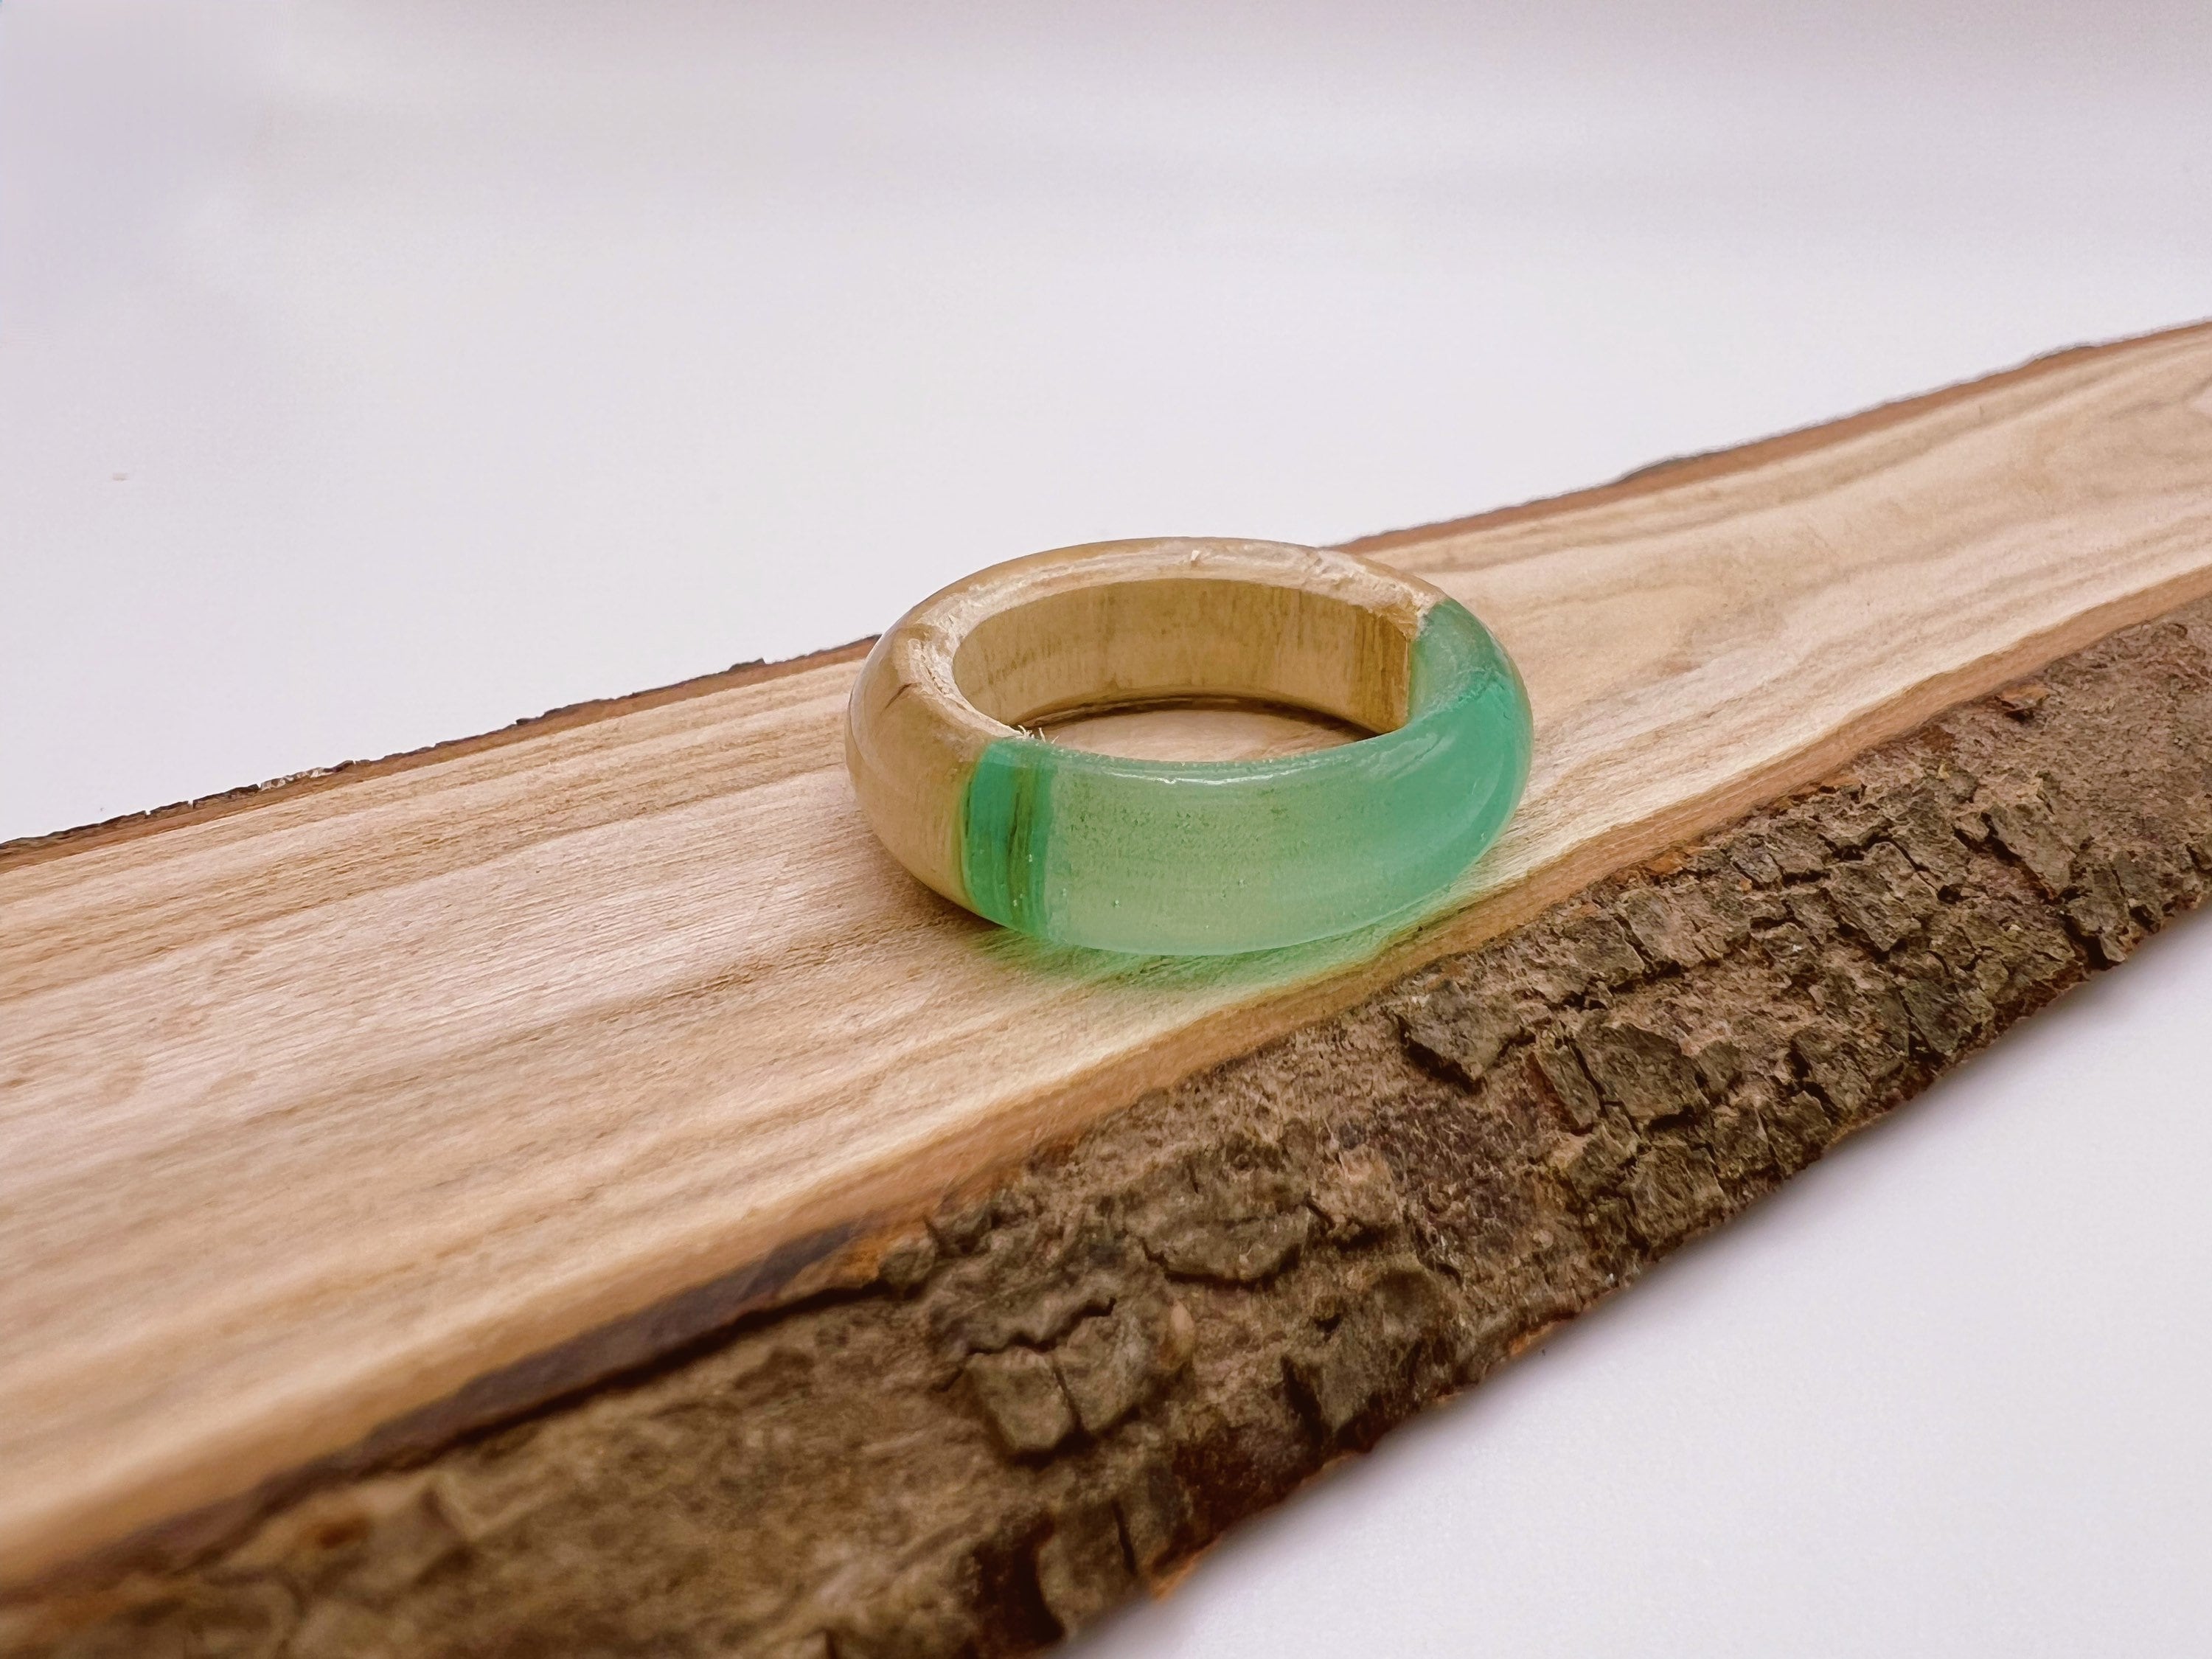 Seafoam green resin and light wood ring